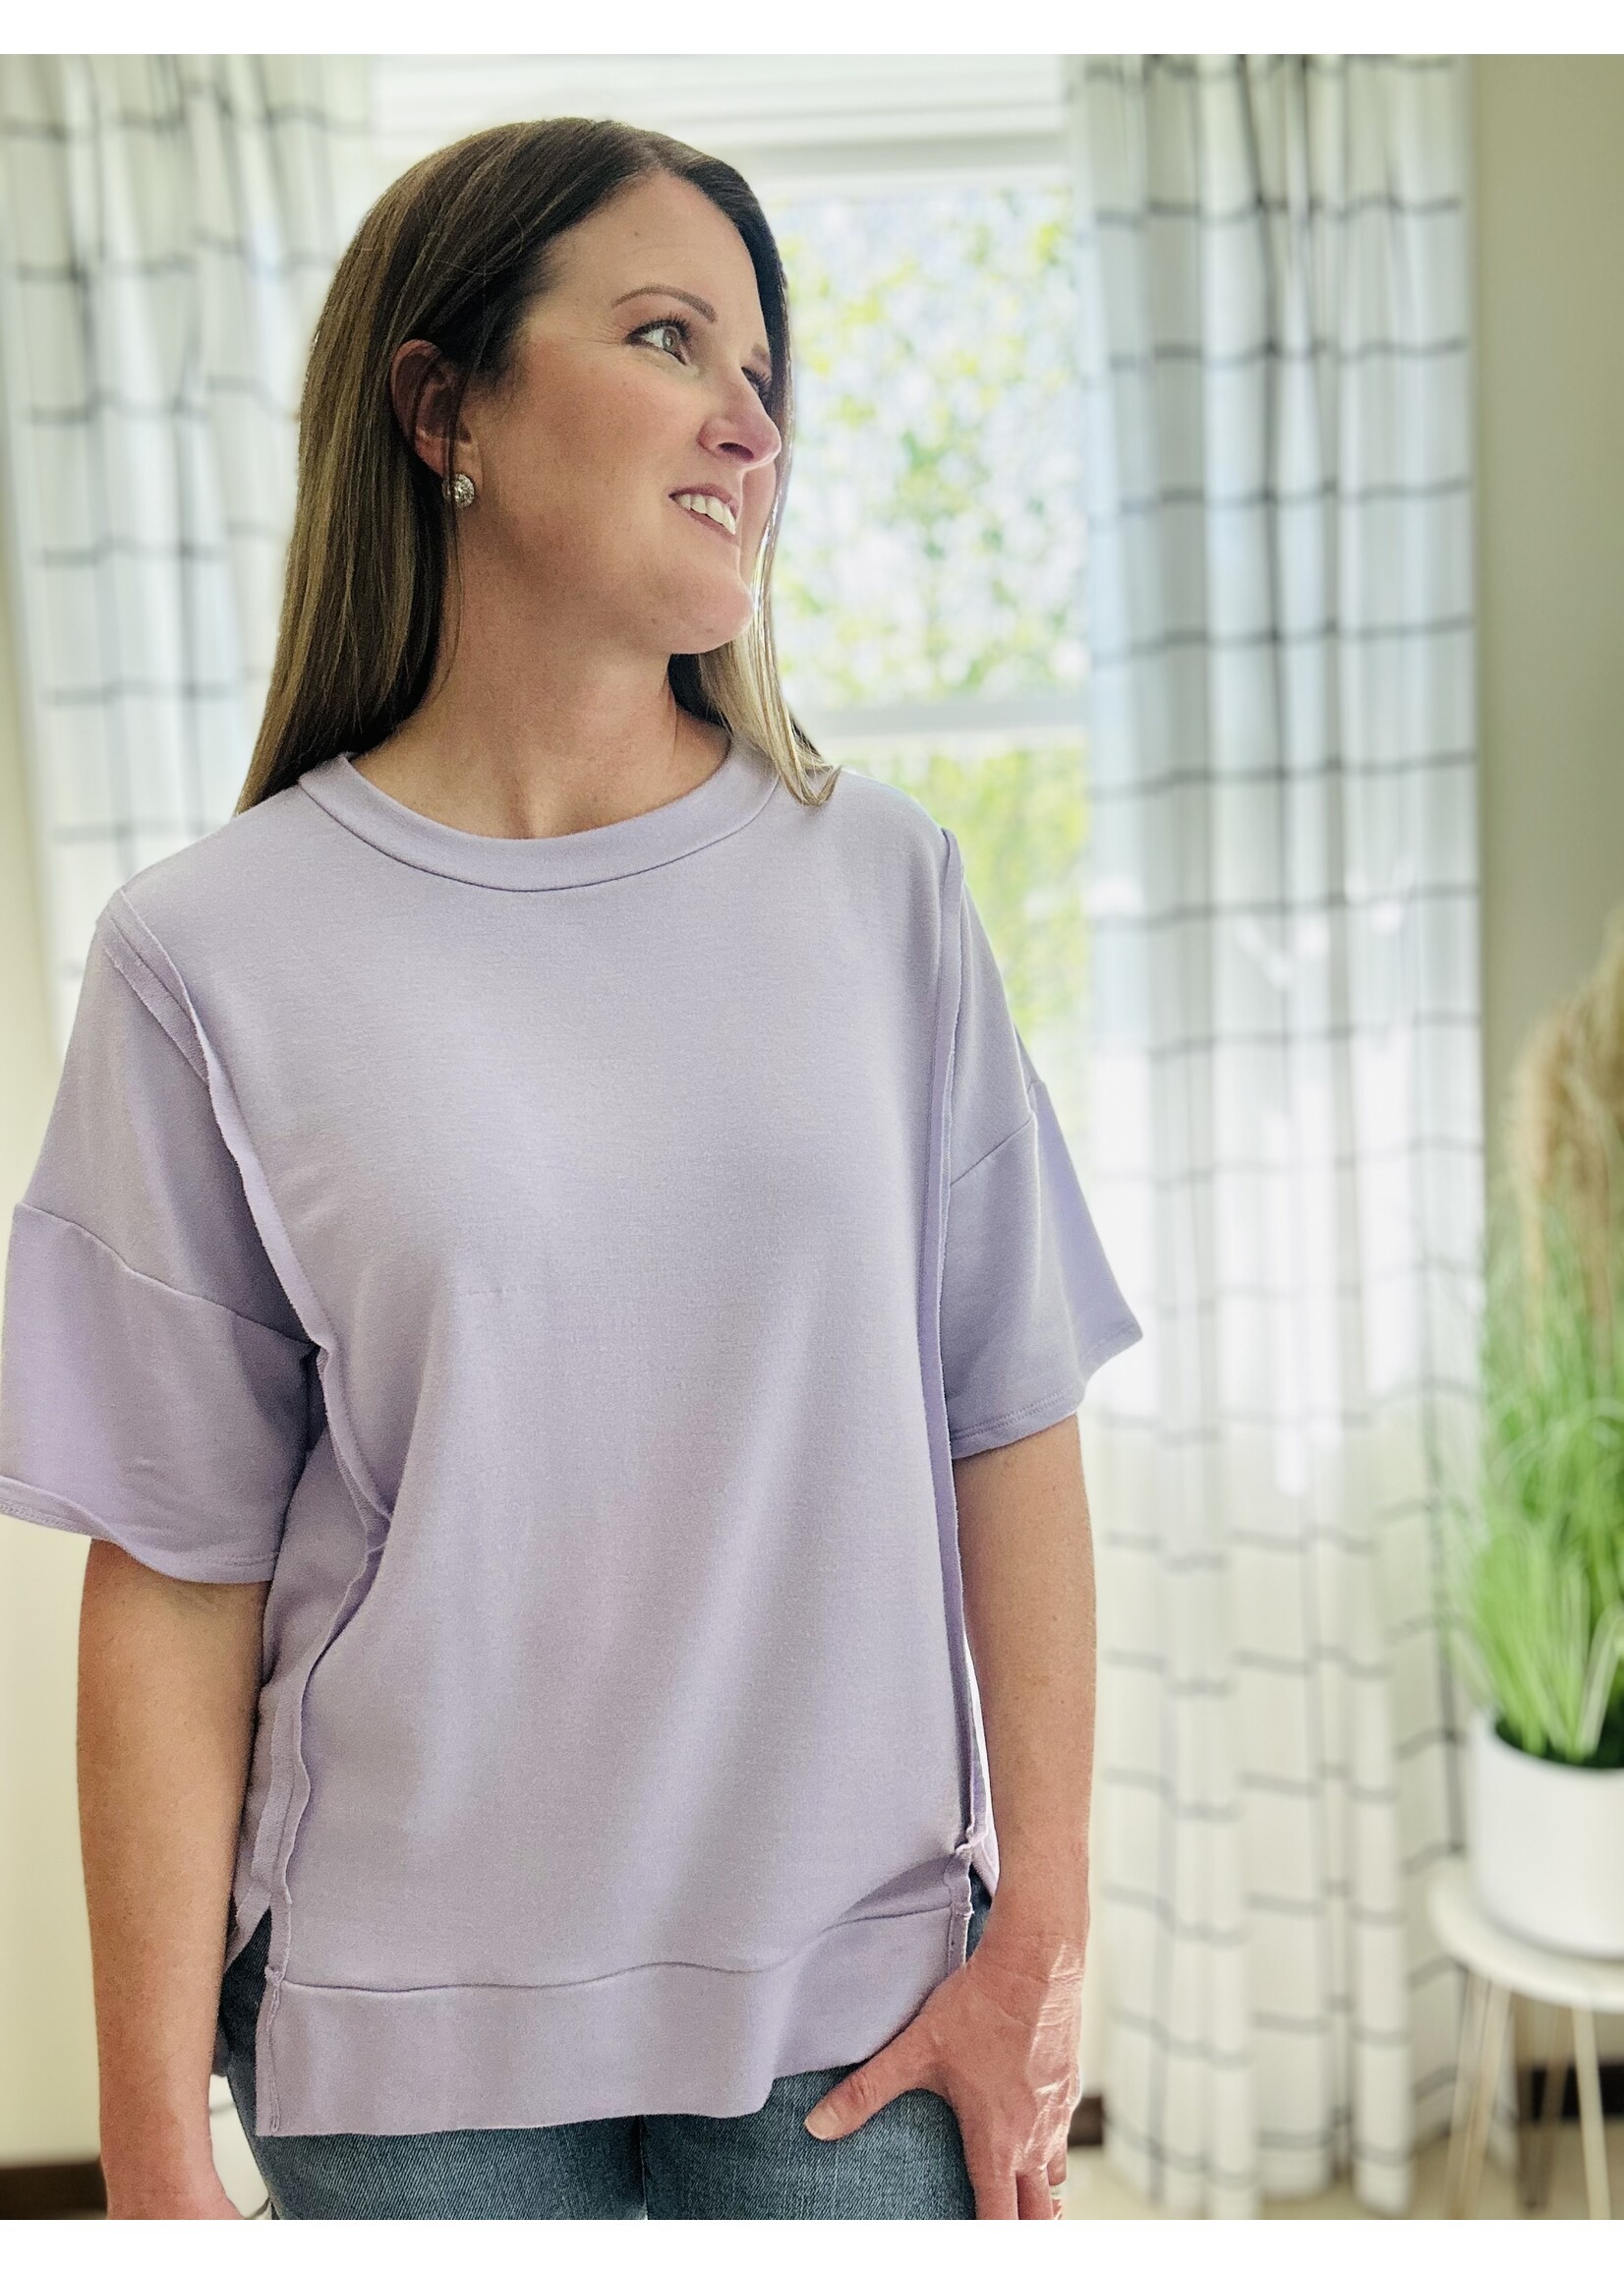 The Hallie Top in Lilac